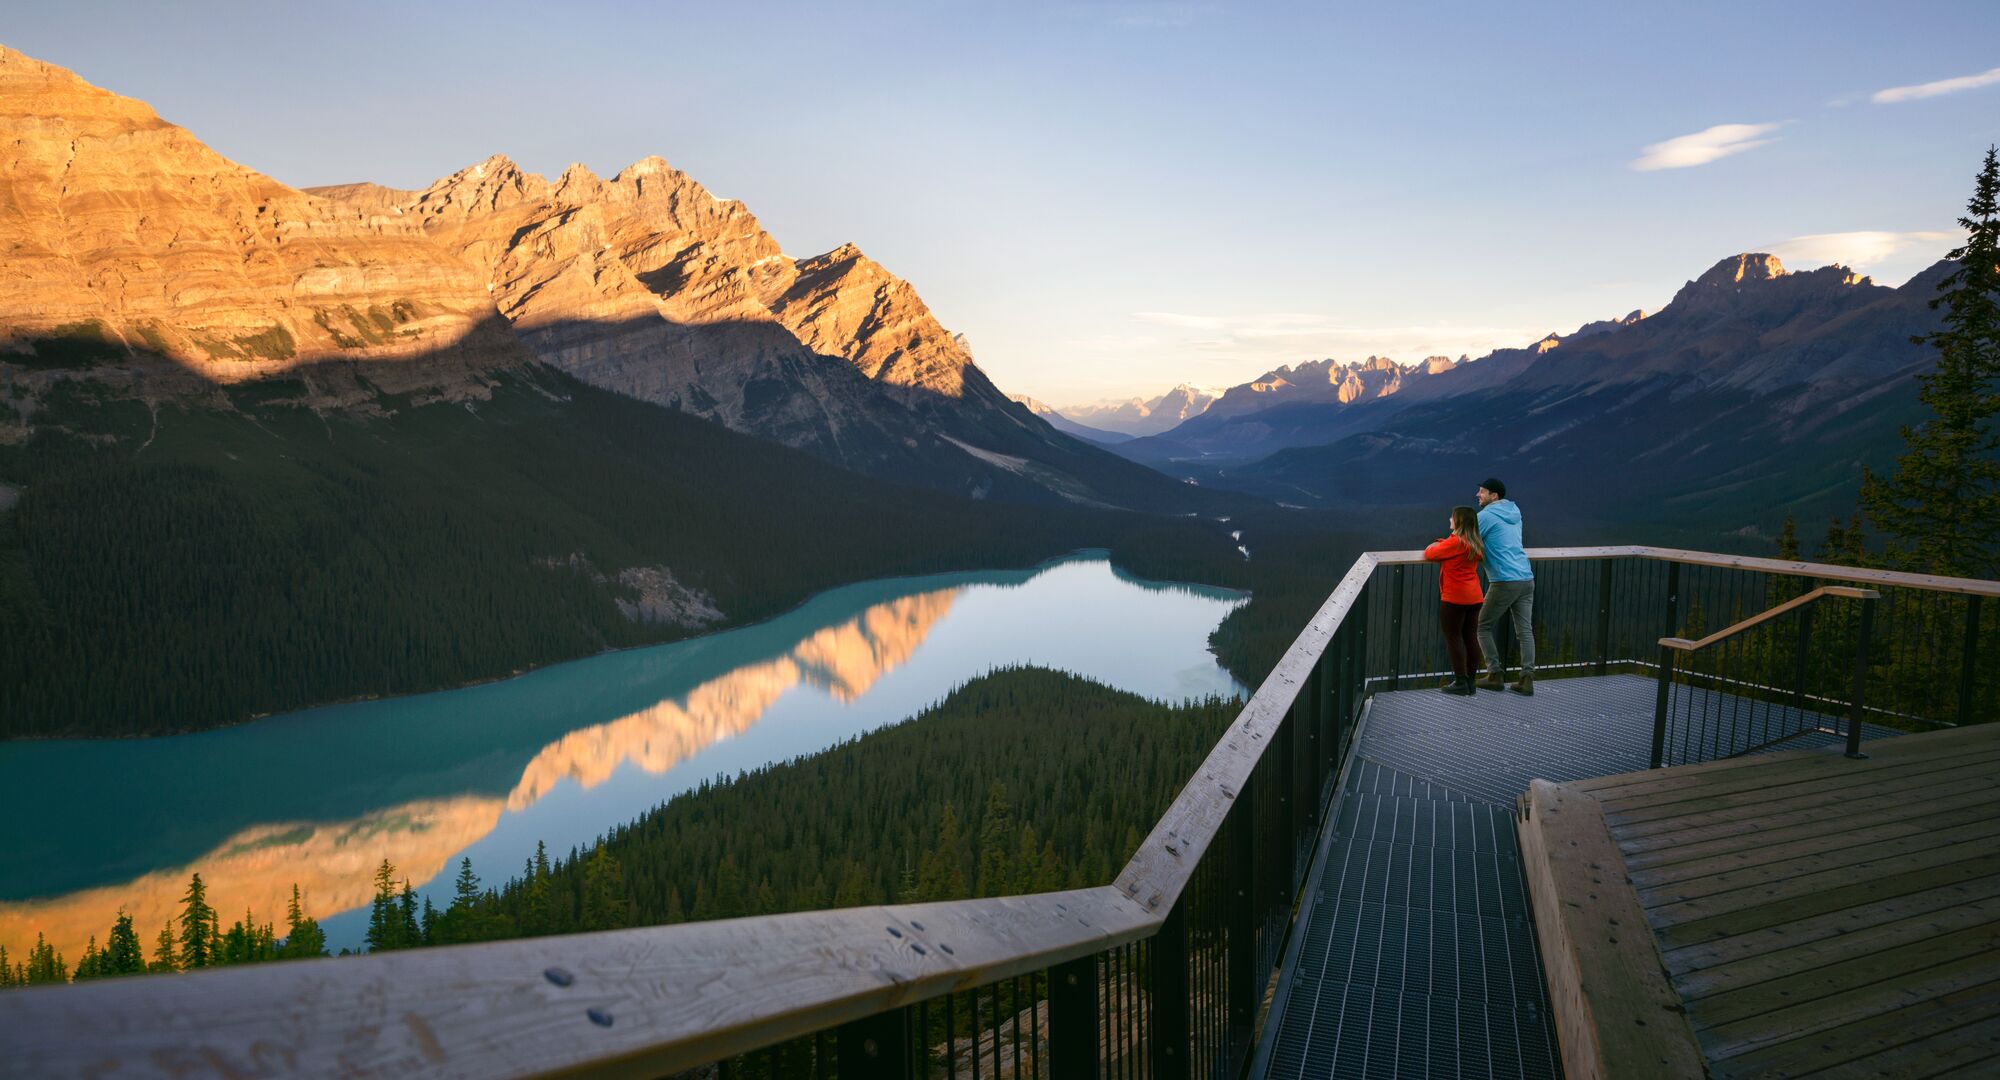 A couple stand on the viewing deck looking out at the view of Peyto Lake and the surrounding mountains.